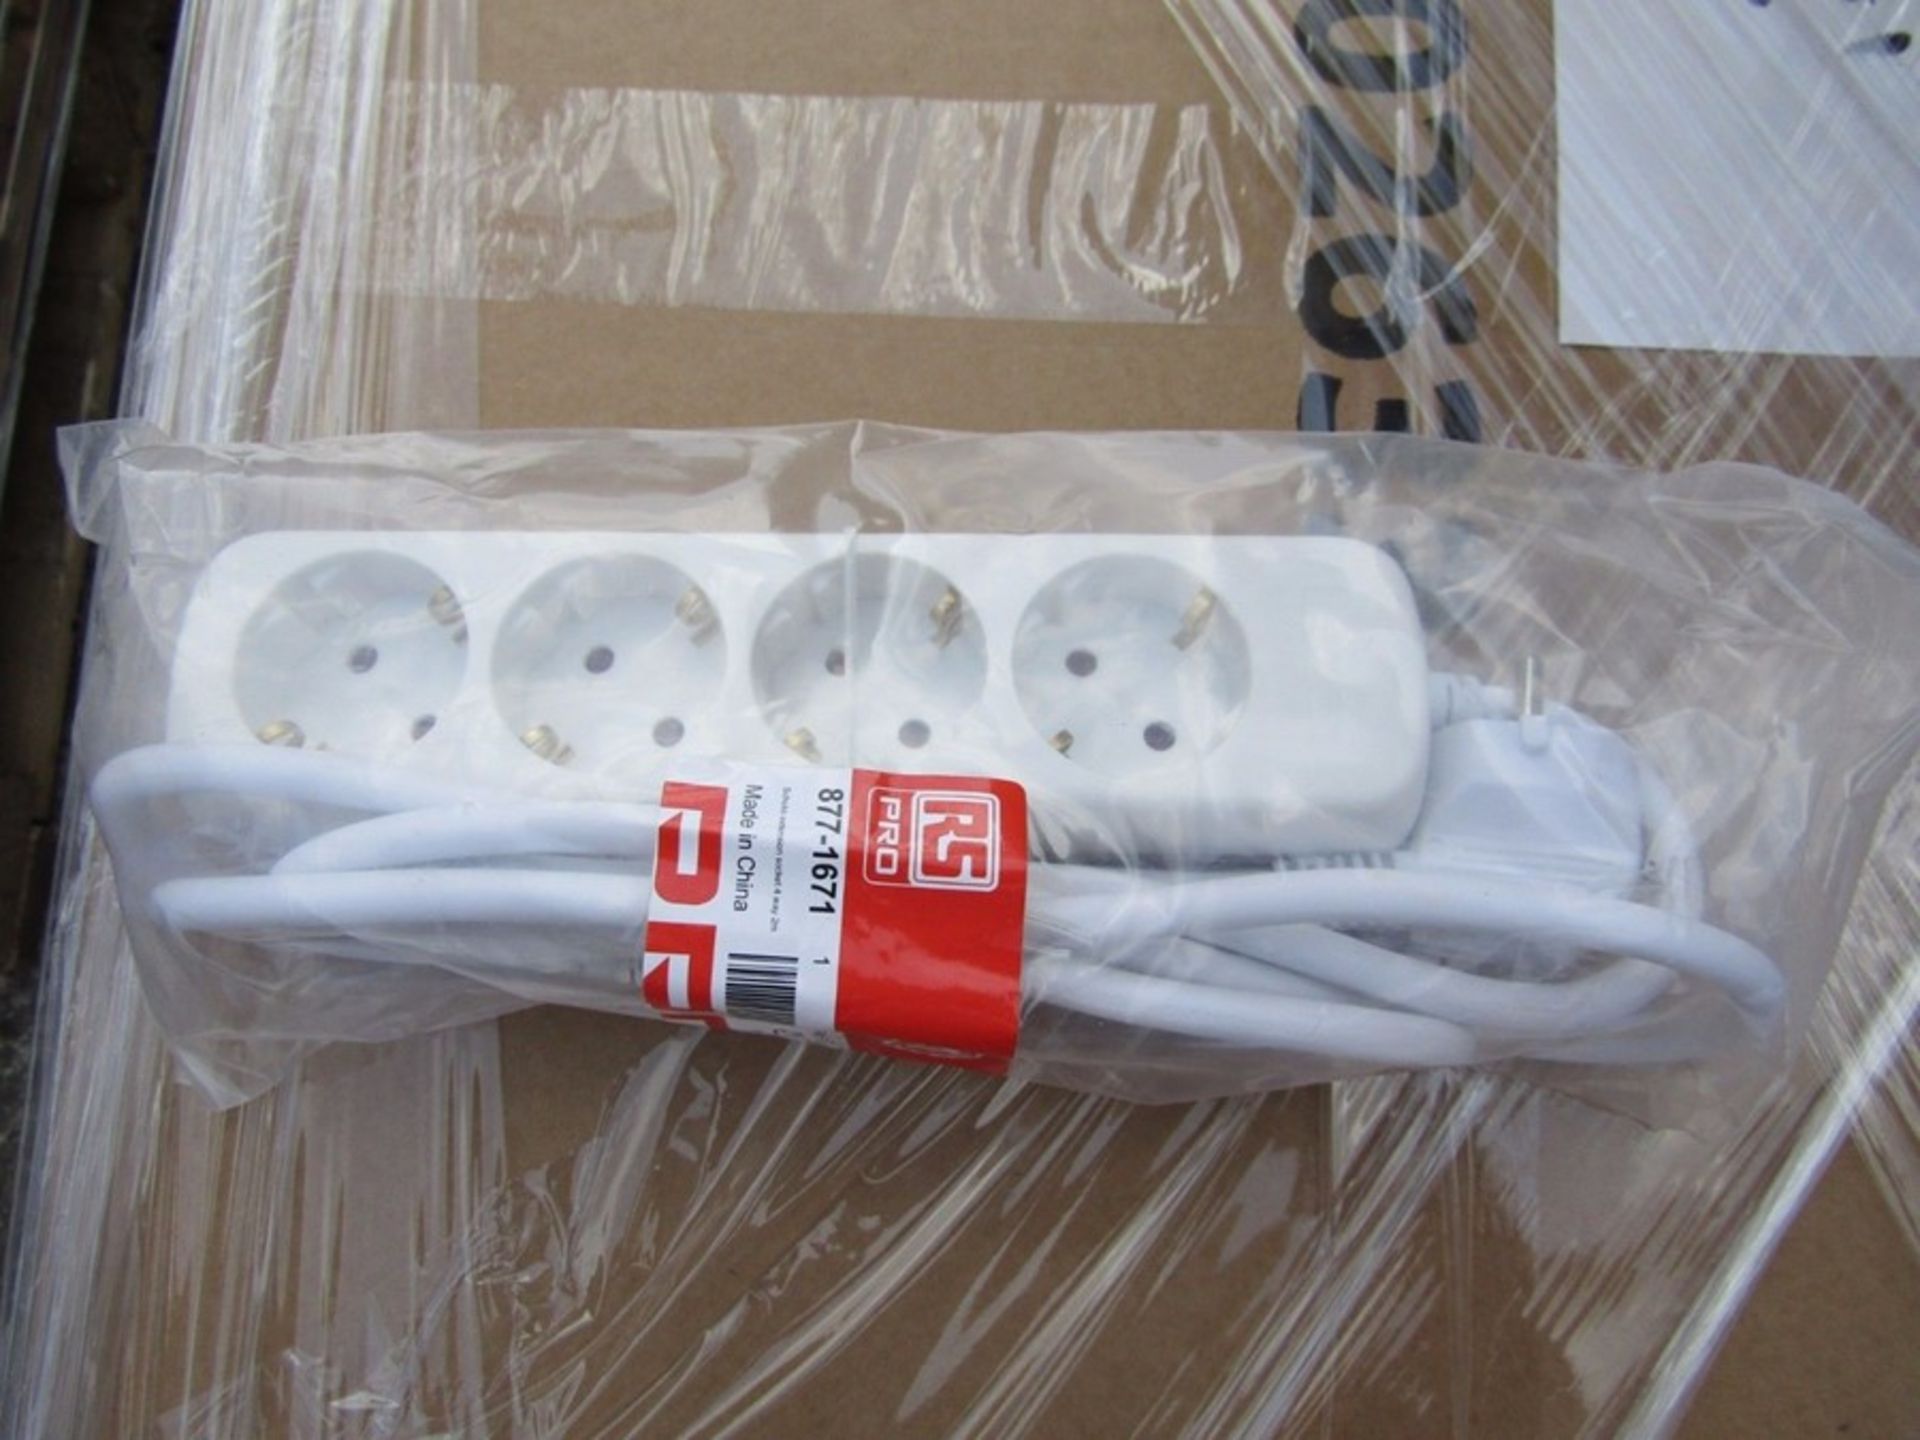 200 x Type F German 4 Way Switched Extension Sockets with CEE7/7 Plug